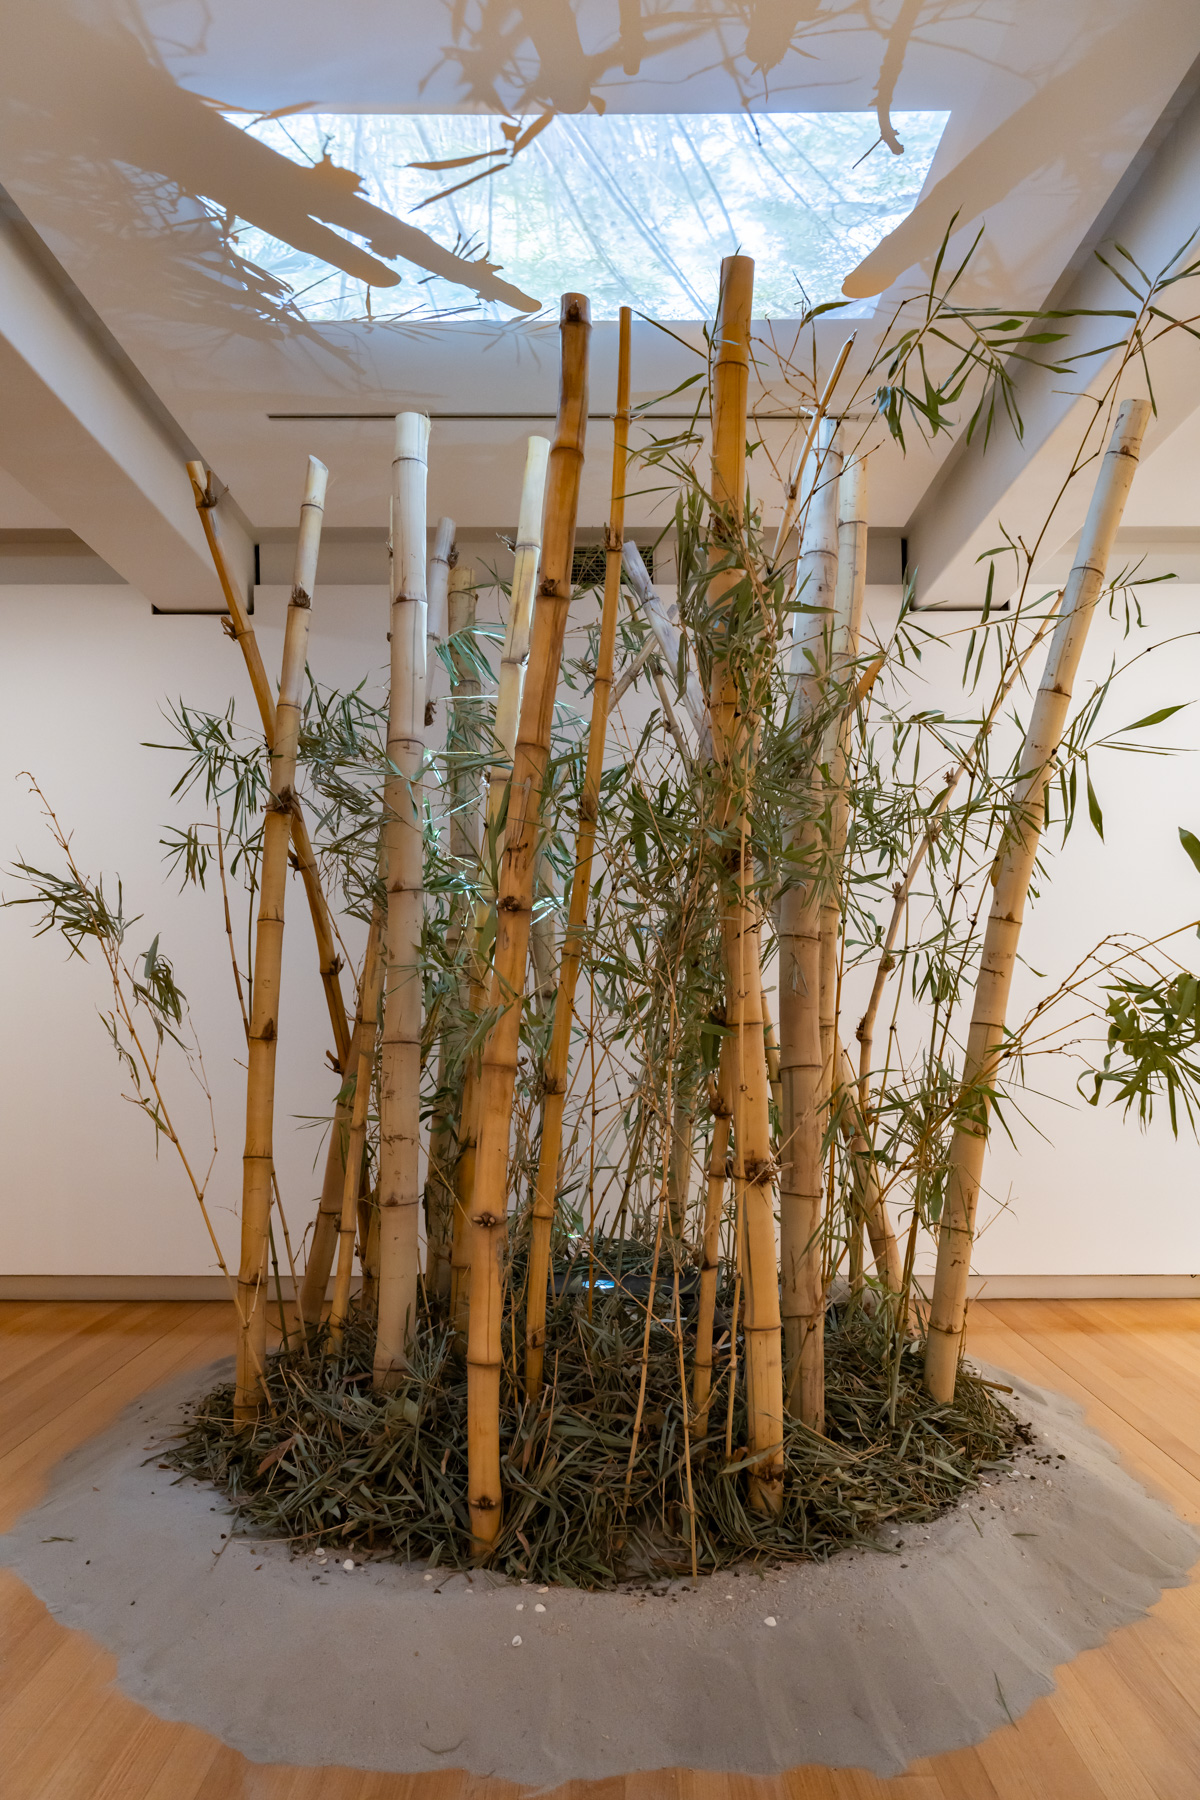 A bamboo grove on a raised mound of sand in a gallery space with a video projection above it on the ceiling